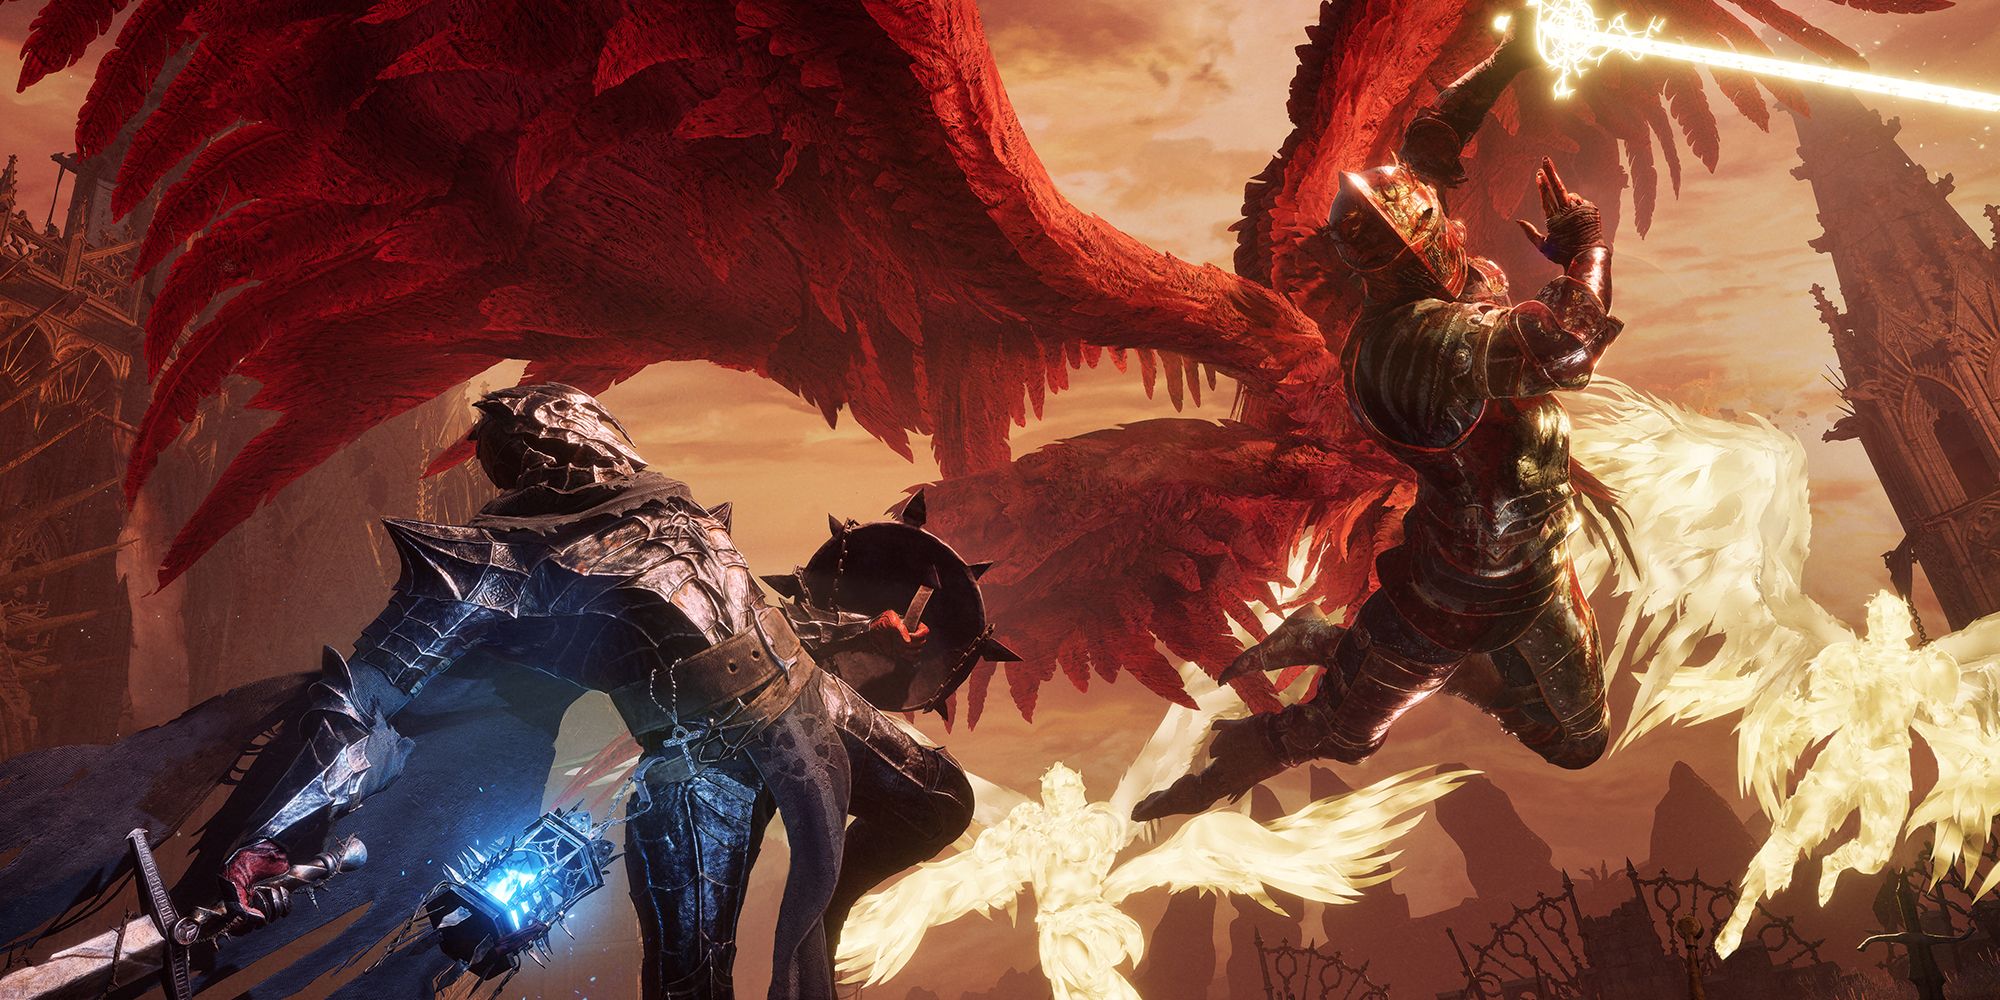 Lords of the Fallen player leaping in the air to swing at Pieta, a knight with red wings in front of two ghostly golden spirit versions of herself.